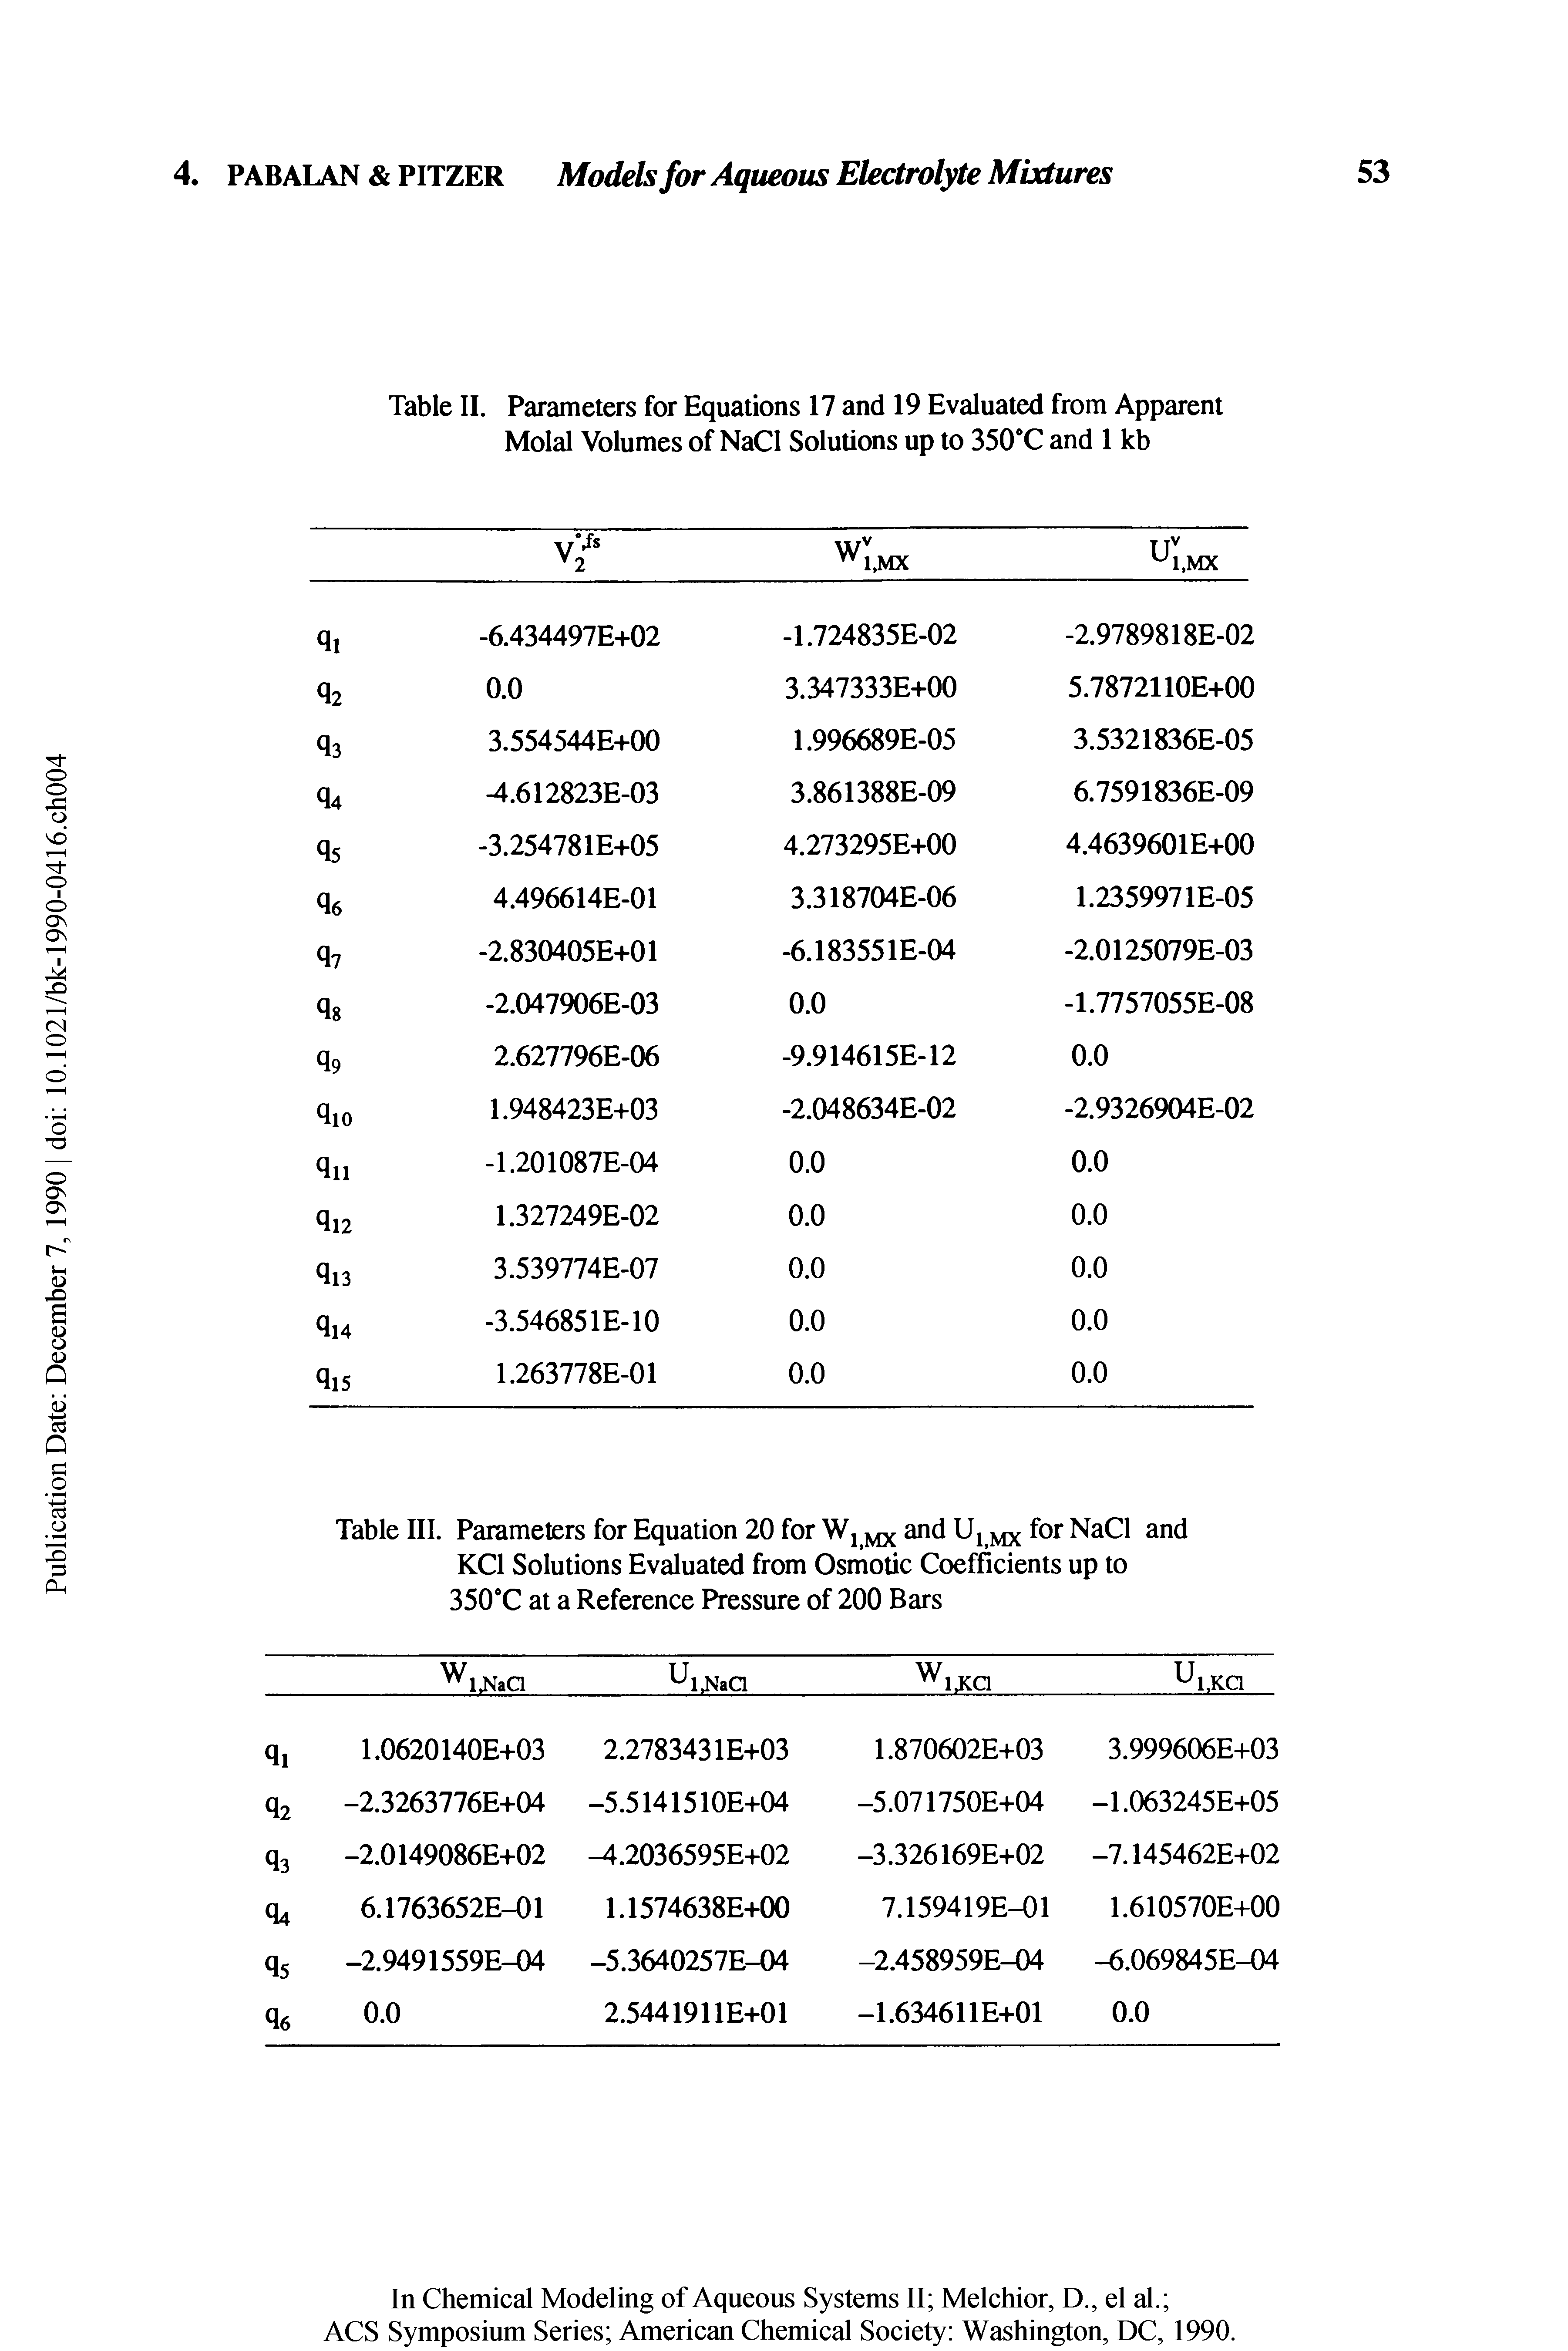 Table III. Parameters for Equation 20 for Wj and Uj for NaCl and KCl Solutions Evaluated from Osmotic Coefficients up to 350 C at a Reference Pressure of 200 Bars...